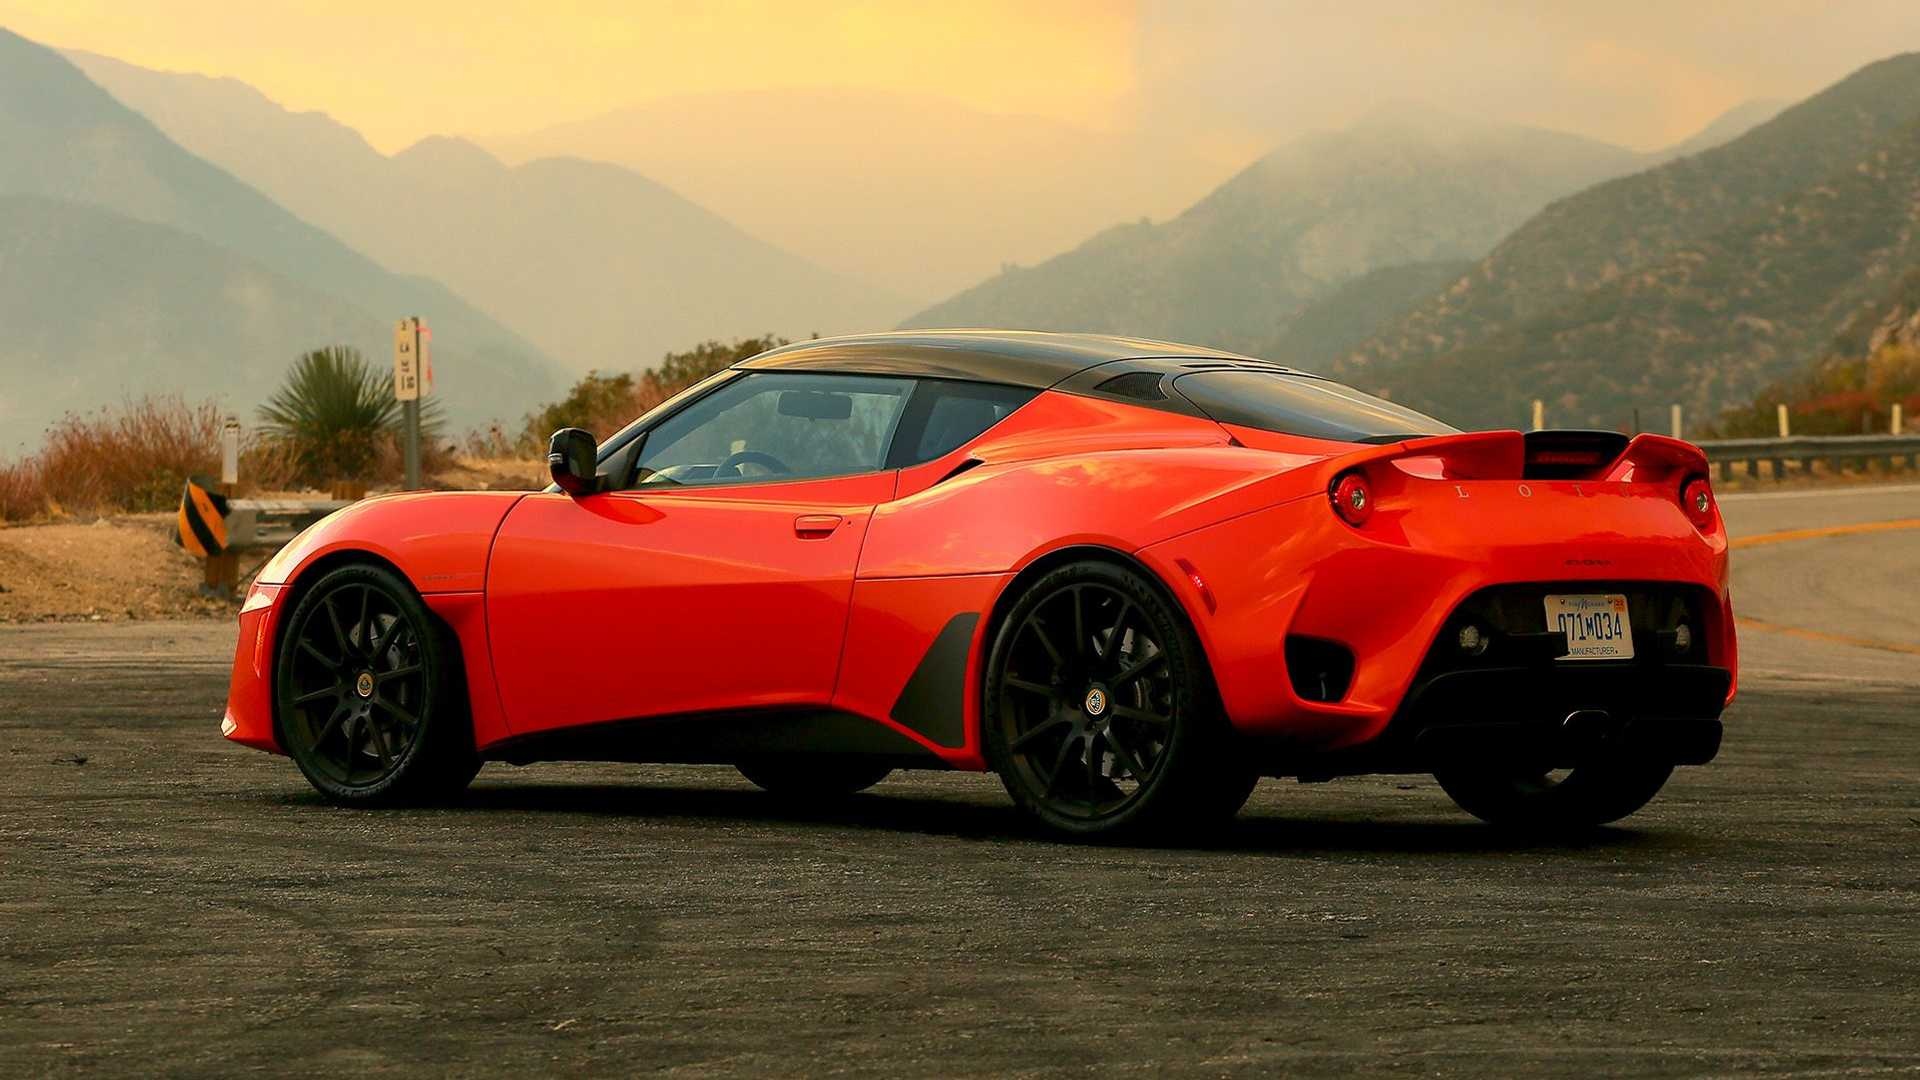 Lotus Evora GT, Drive notes, High-quality pictures, 1920x1080 Full HD Desktop